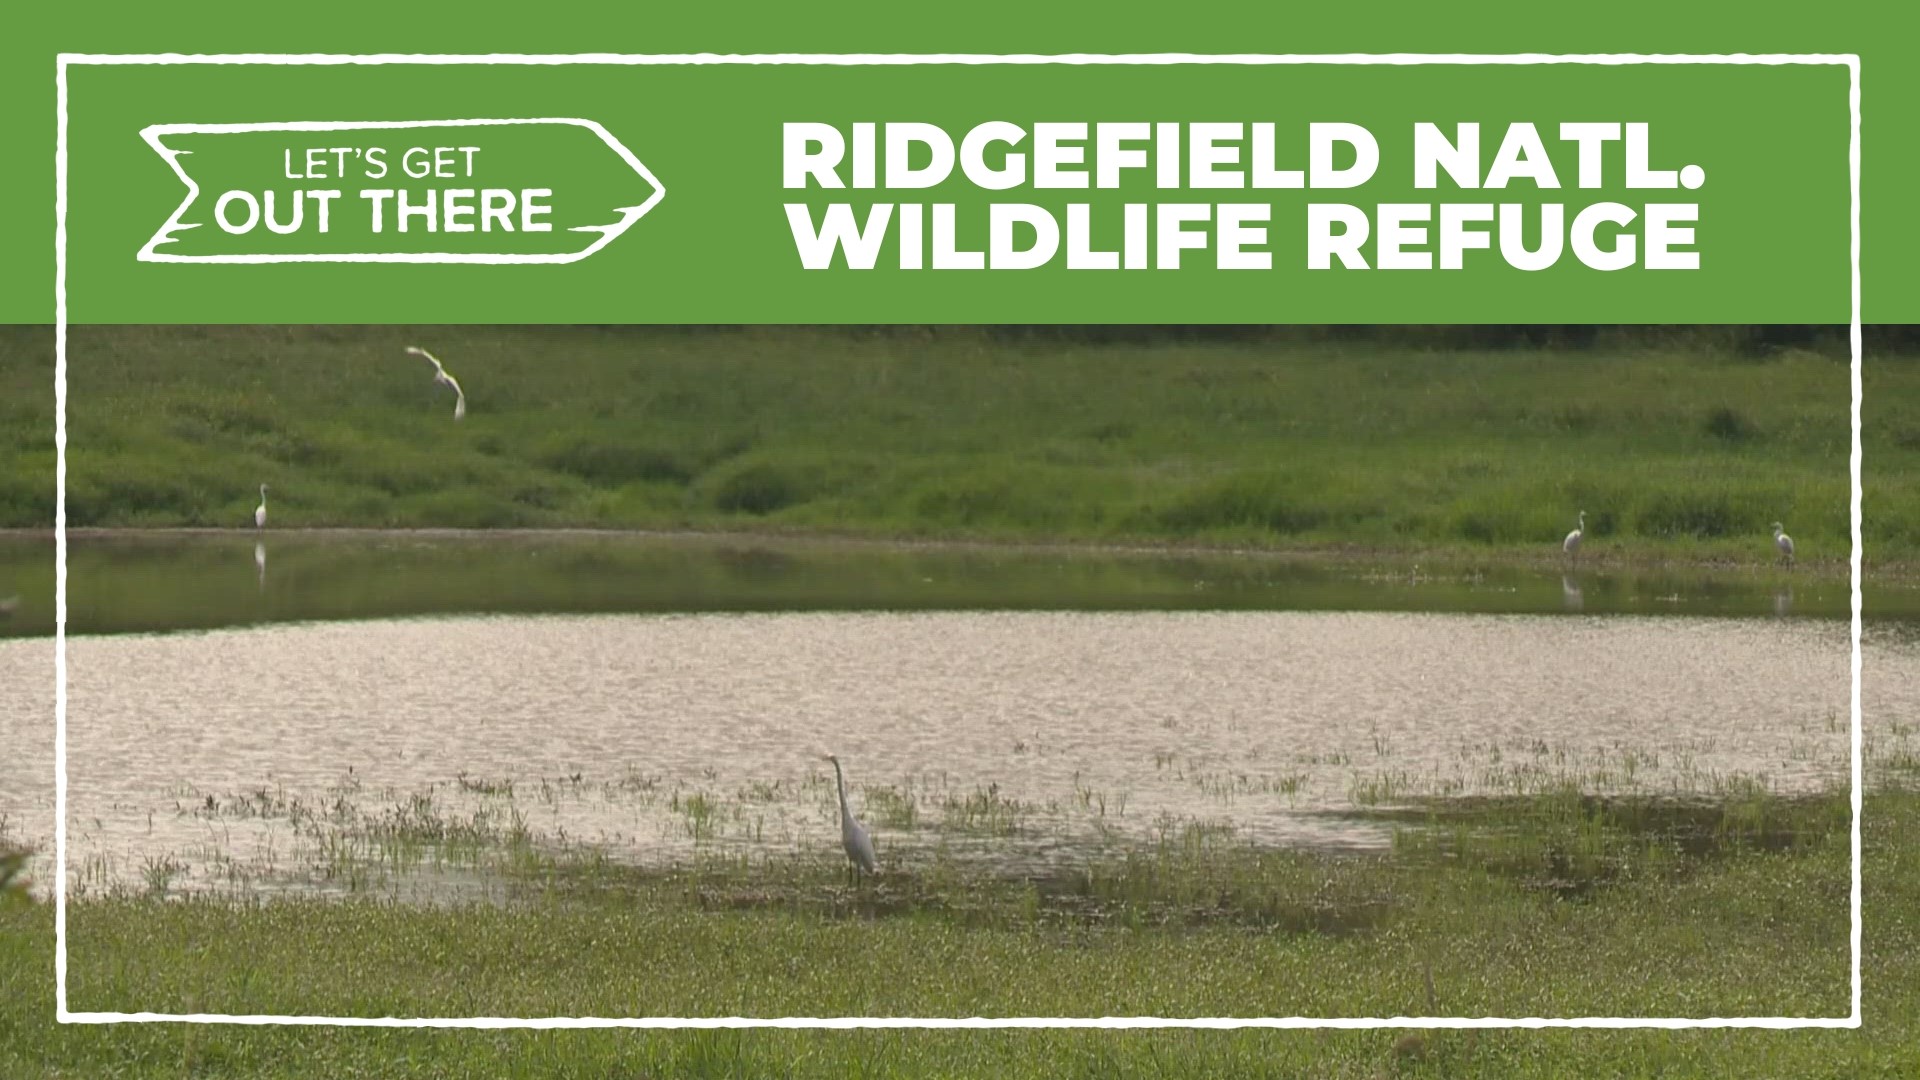 The Ridgefield National Wildlife Refuge is home to a network of accessible trails and roads. From them, you can take in so much that nature has to offer.